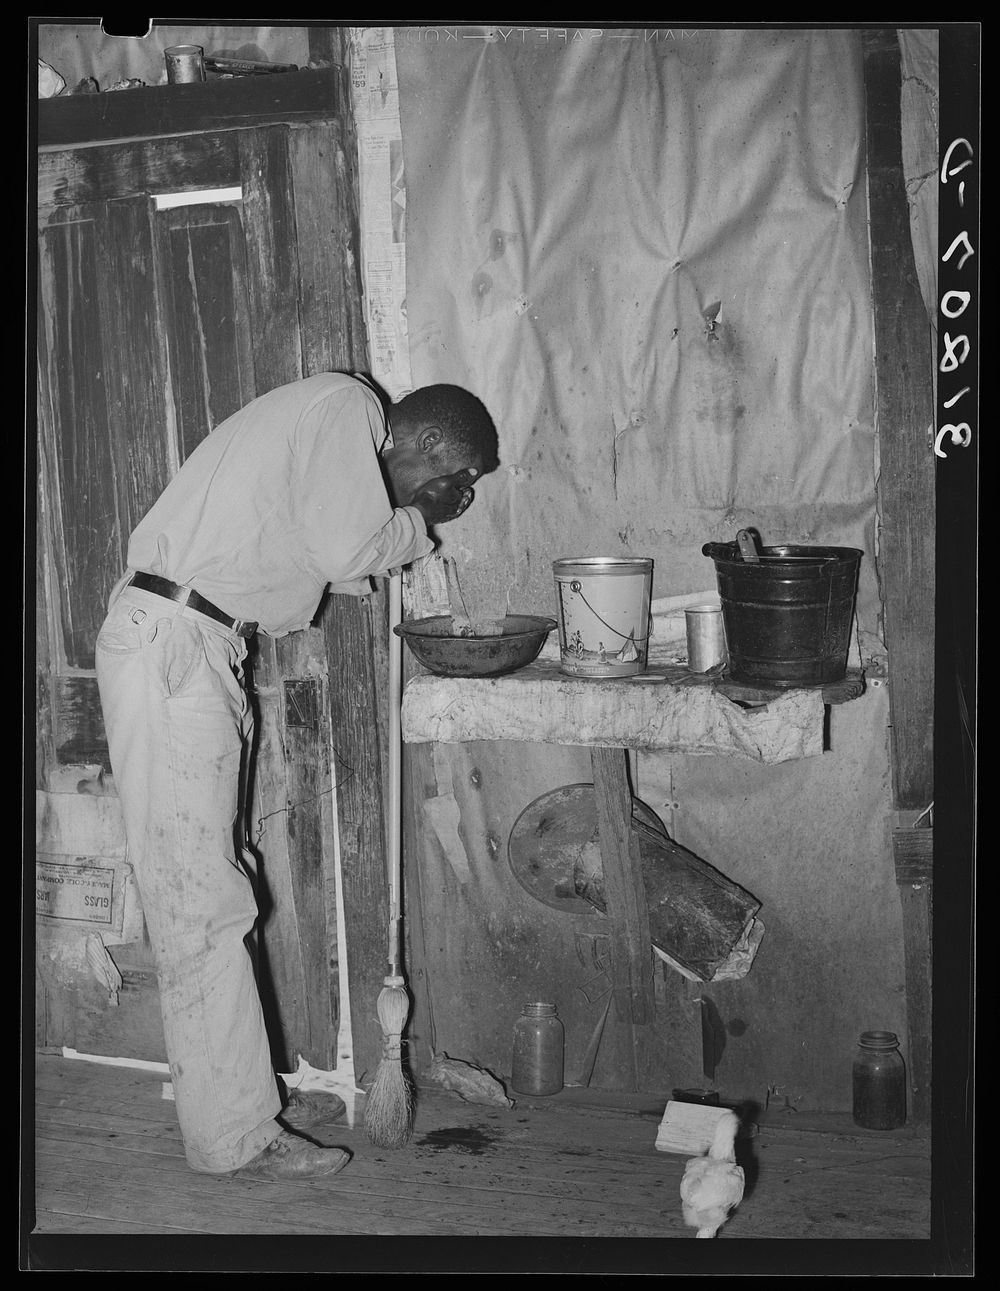 Southeast Missouri Farms. FSA (Farm Security Administration) client, former sharecropper, washing his face in former home by…